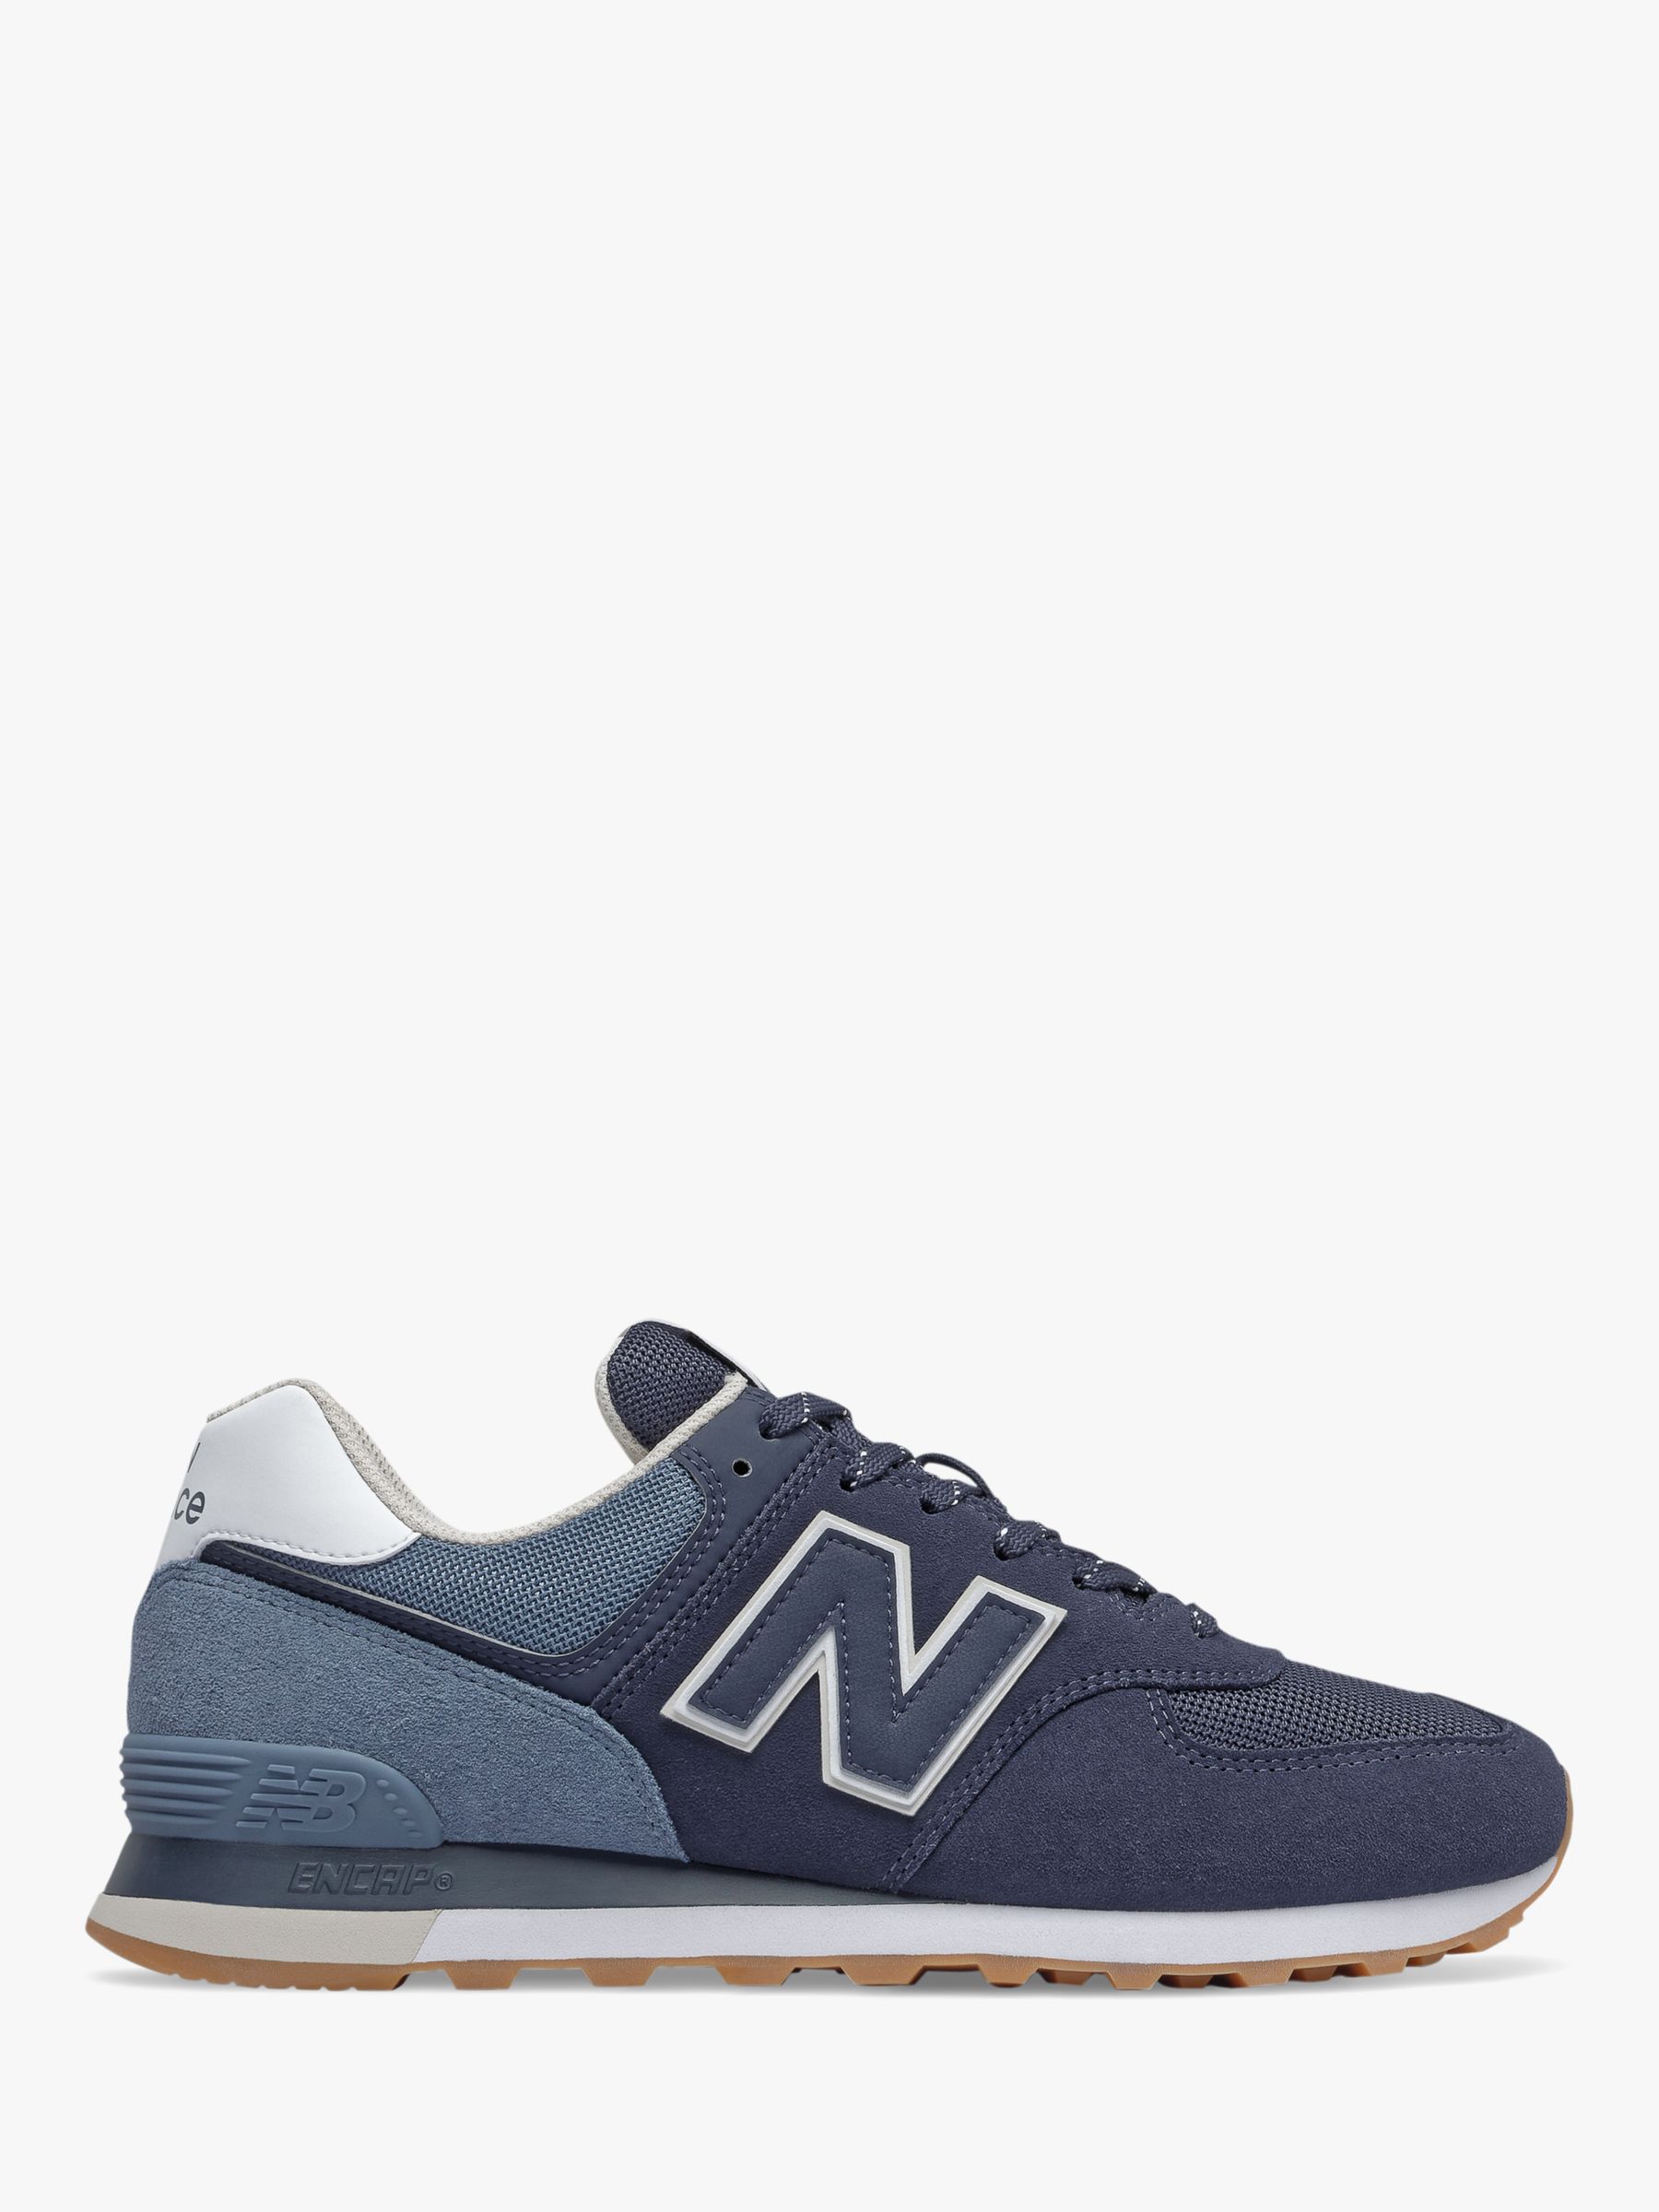 New Balance 574 Suede Trainers, Navy/Deep Porcelain Blue at John Lewis ...